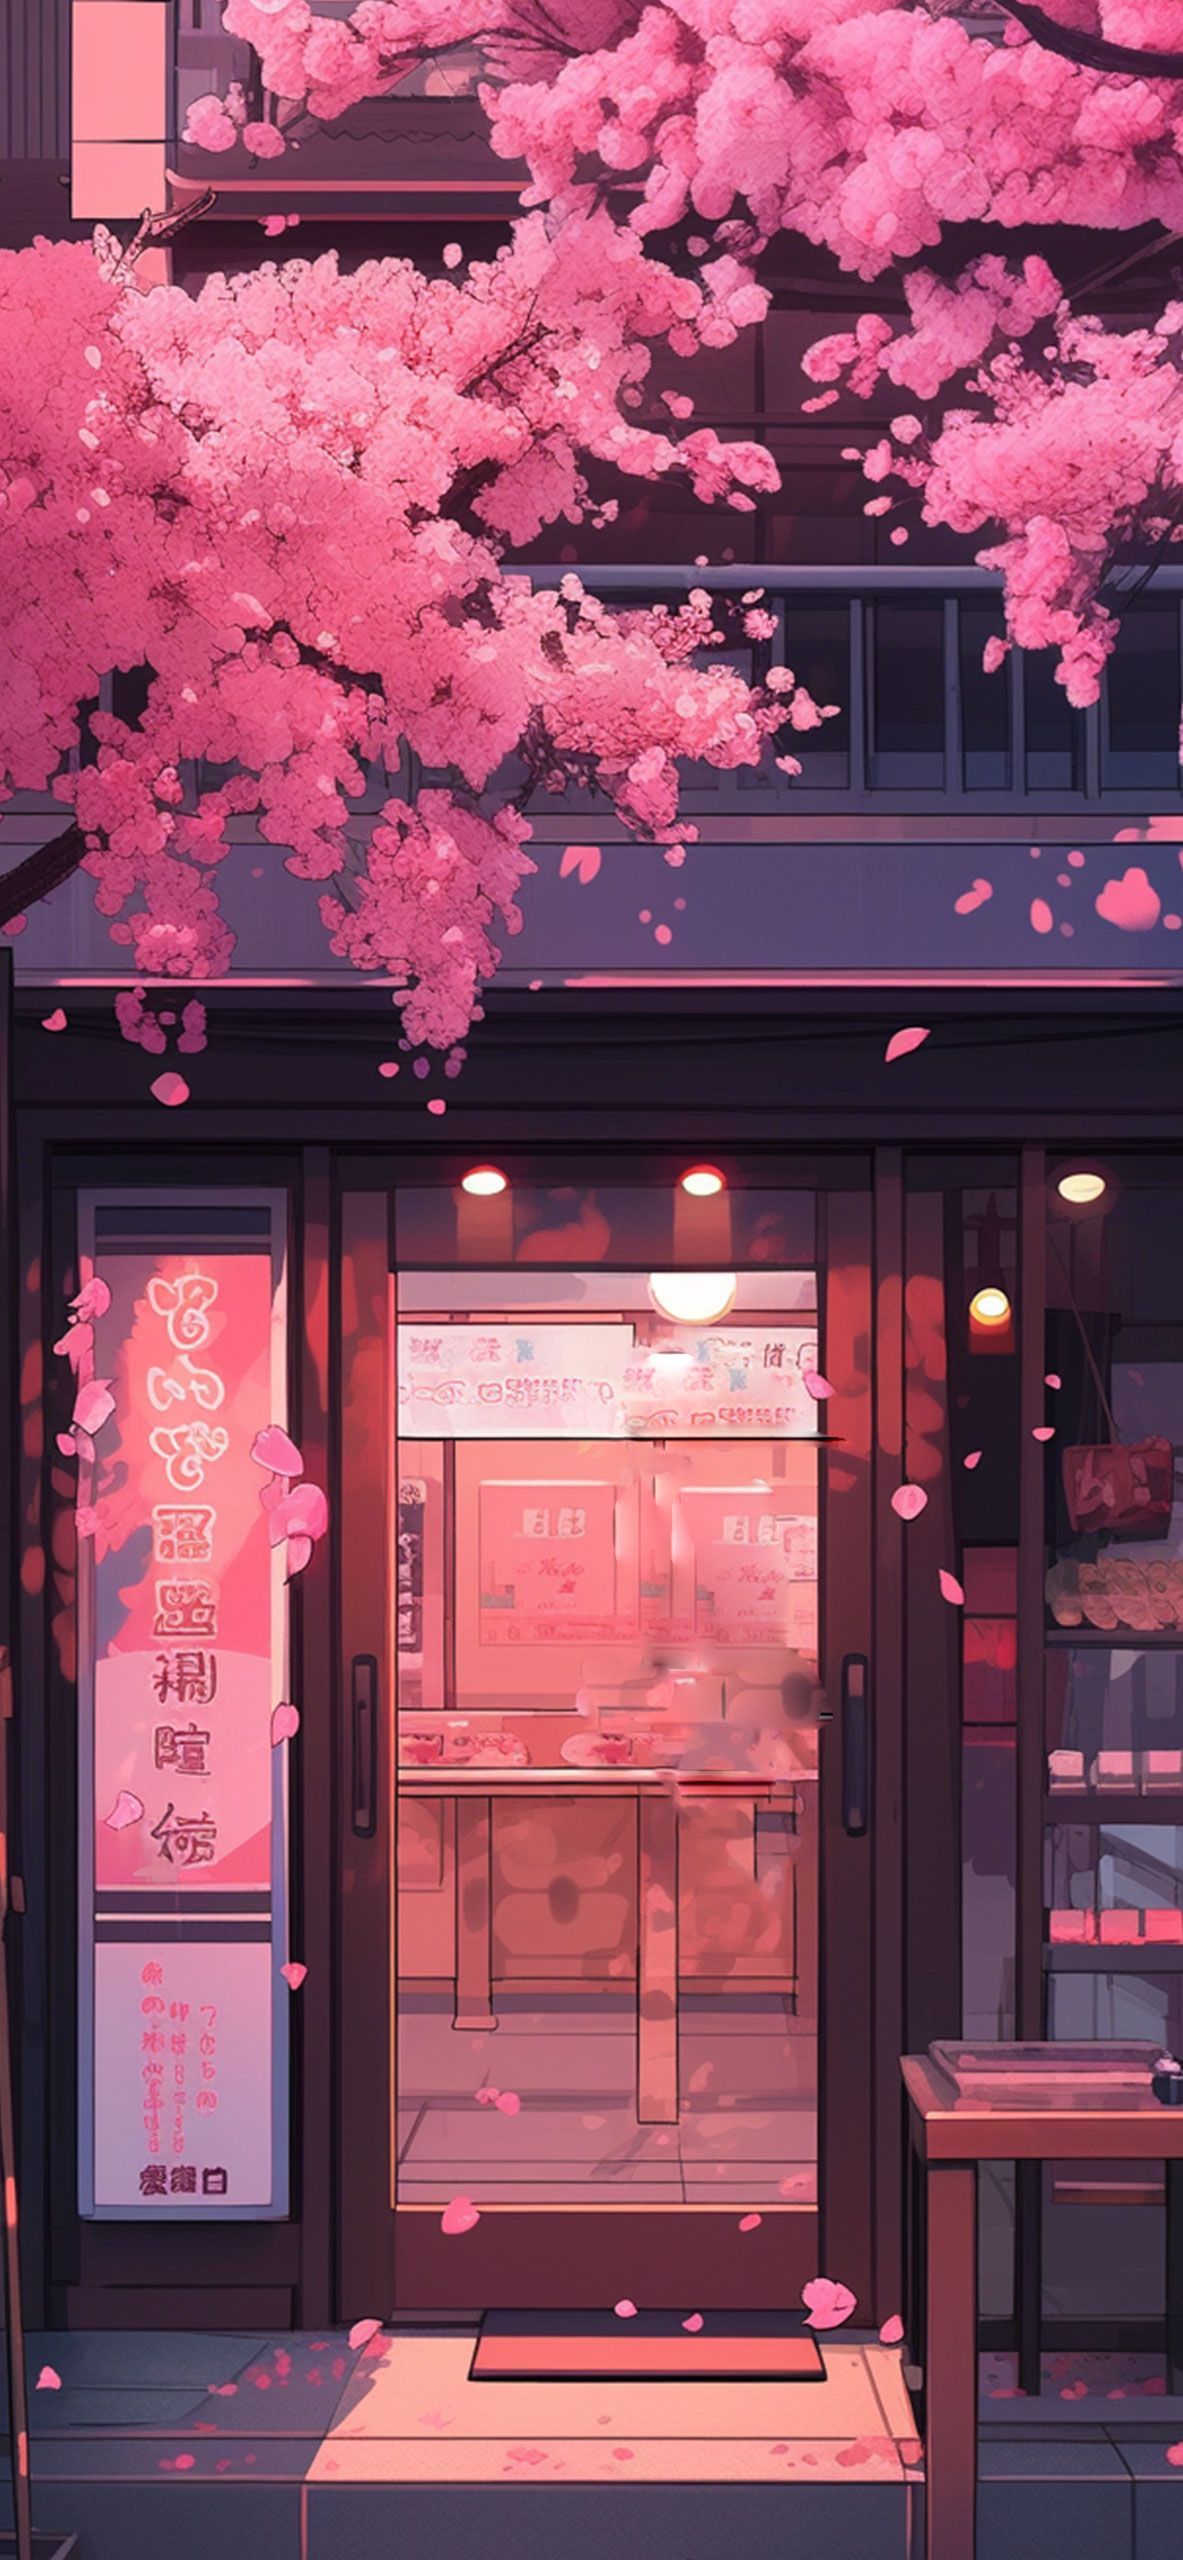 Anime aesthetic phone background with cherry blossoms - Japan, cherry blossom, beautiful